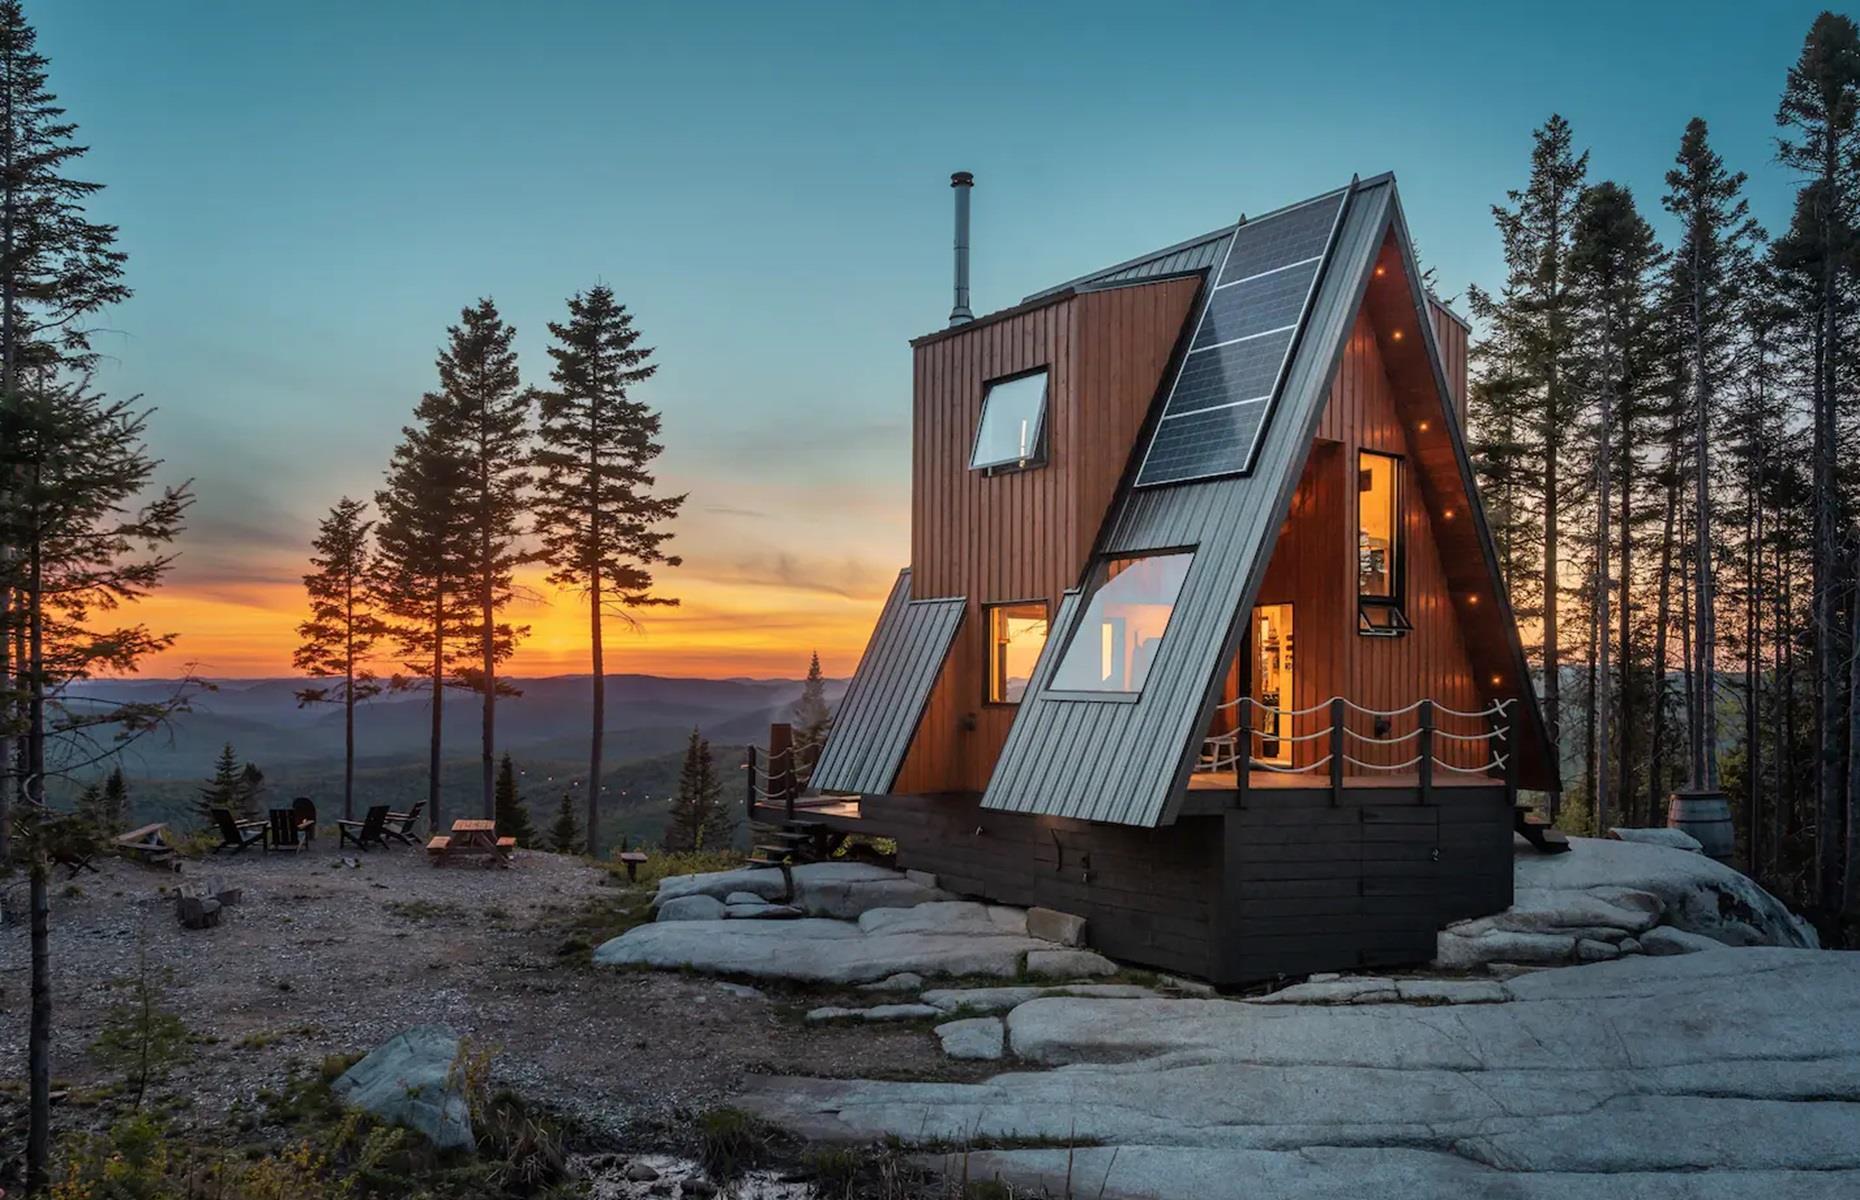 <p>The ultimate holiday home, La Cabin was cleverly positioned to ensure the interior captures dreamy sunset and sunrise views, while every inch of space inside has been maximized. It was also designed to ensure guests are warm and cozy, even in extremely cold weather.</p>  <p>This is owed to a solar panel array, two auxiliary heaters, and a high-performance wood stove.</p>